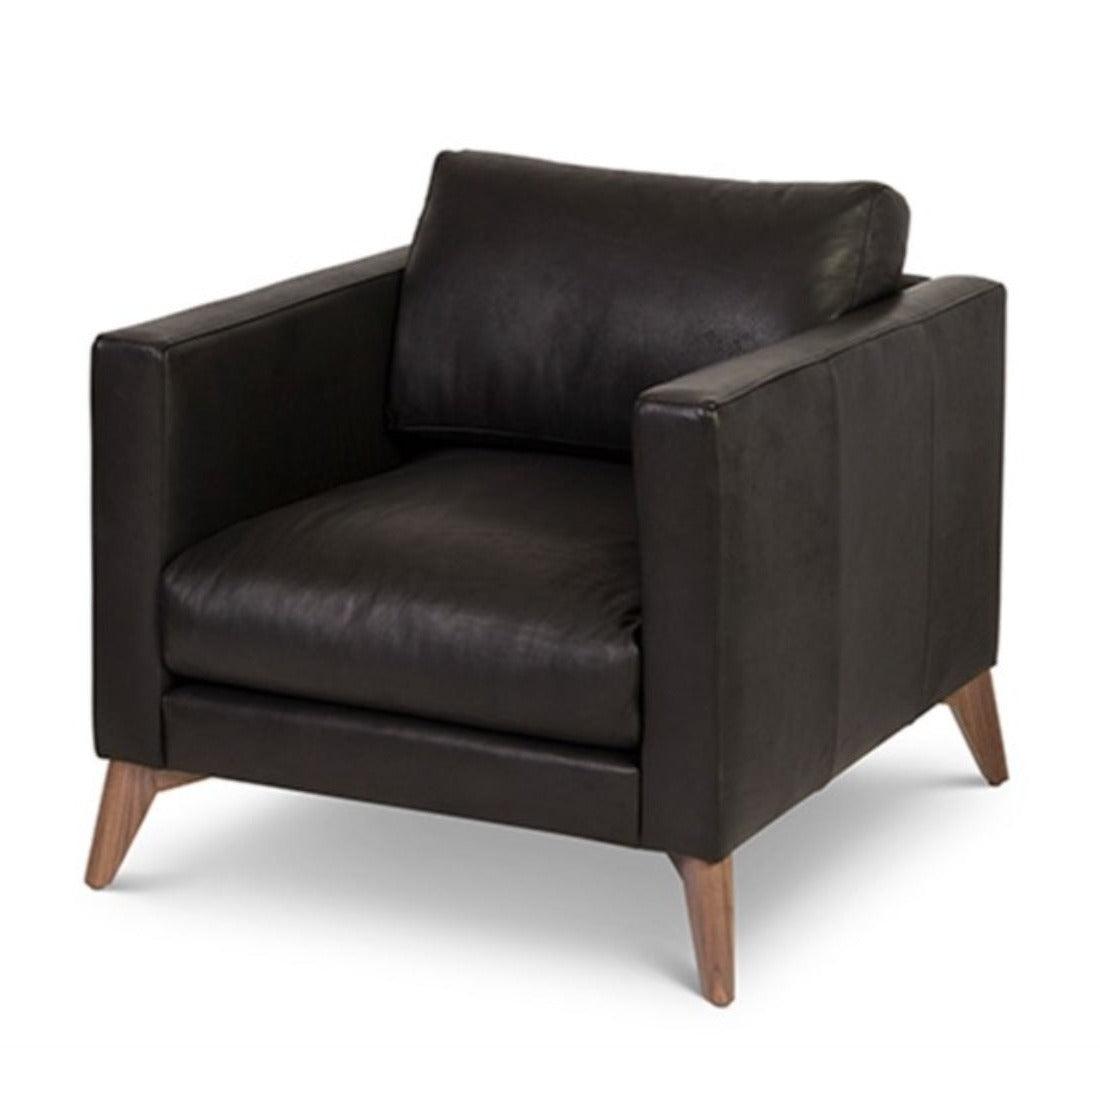 Burbank Leather Club Chair Environmentally Friendly and Made to Order - Uptown Sebastian